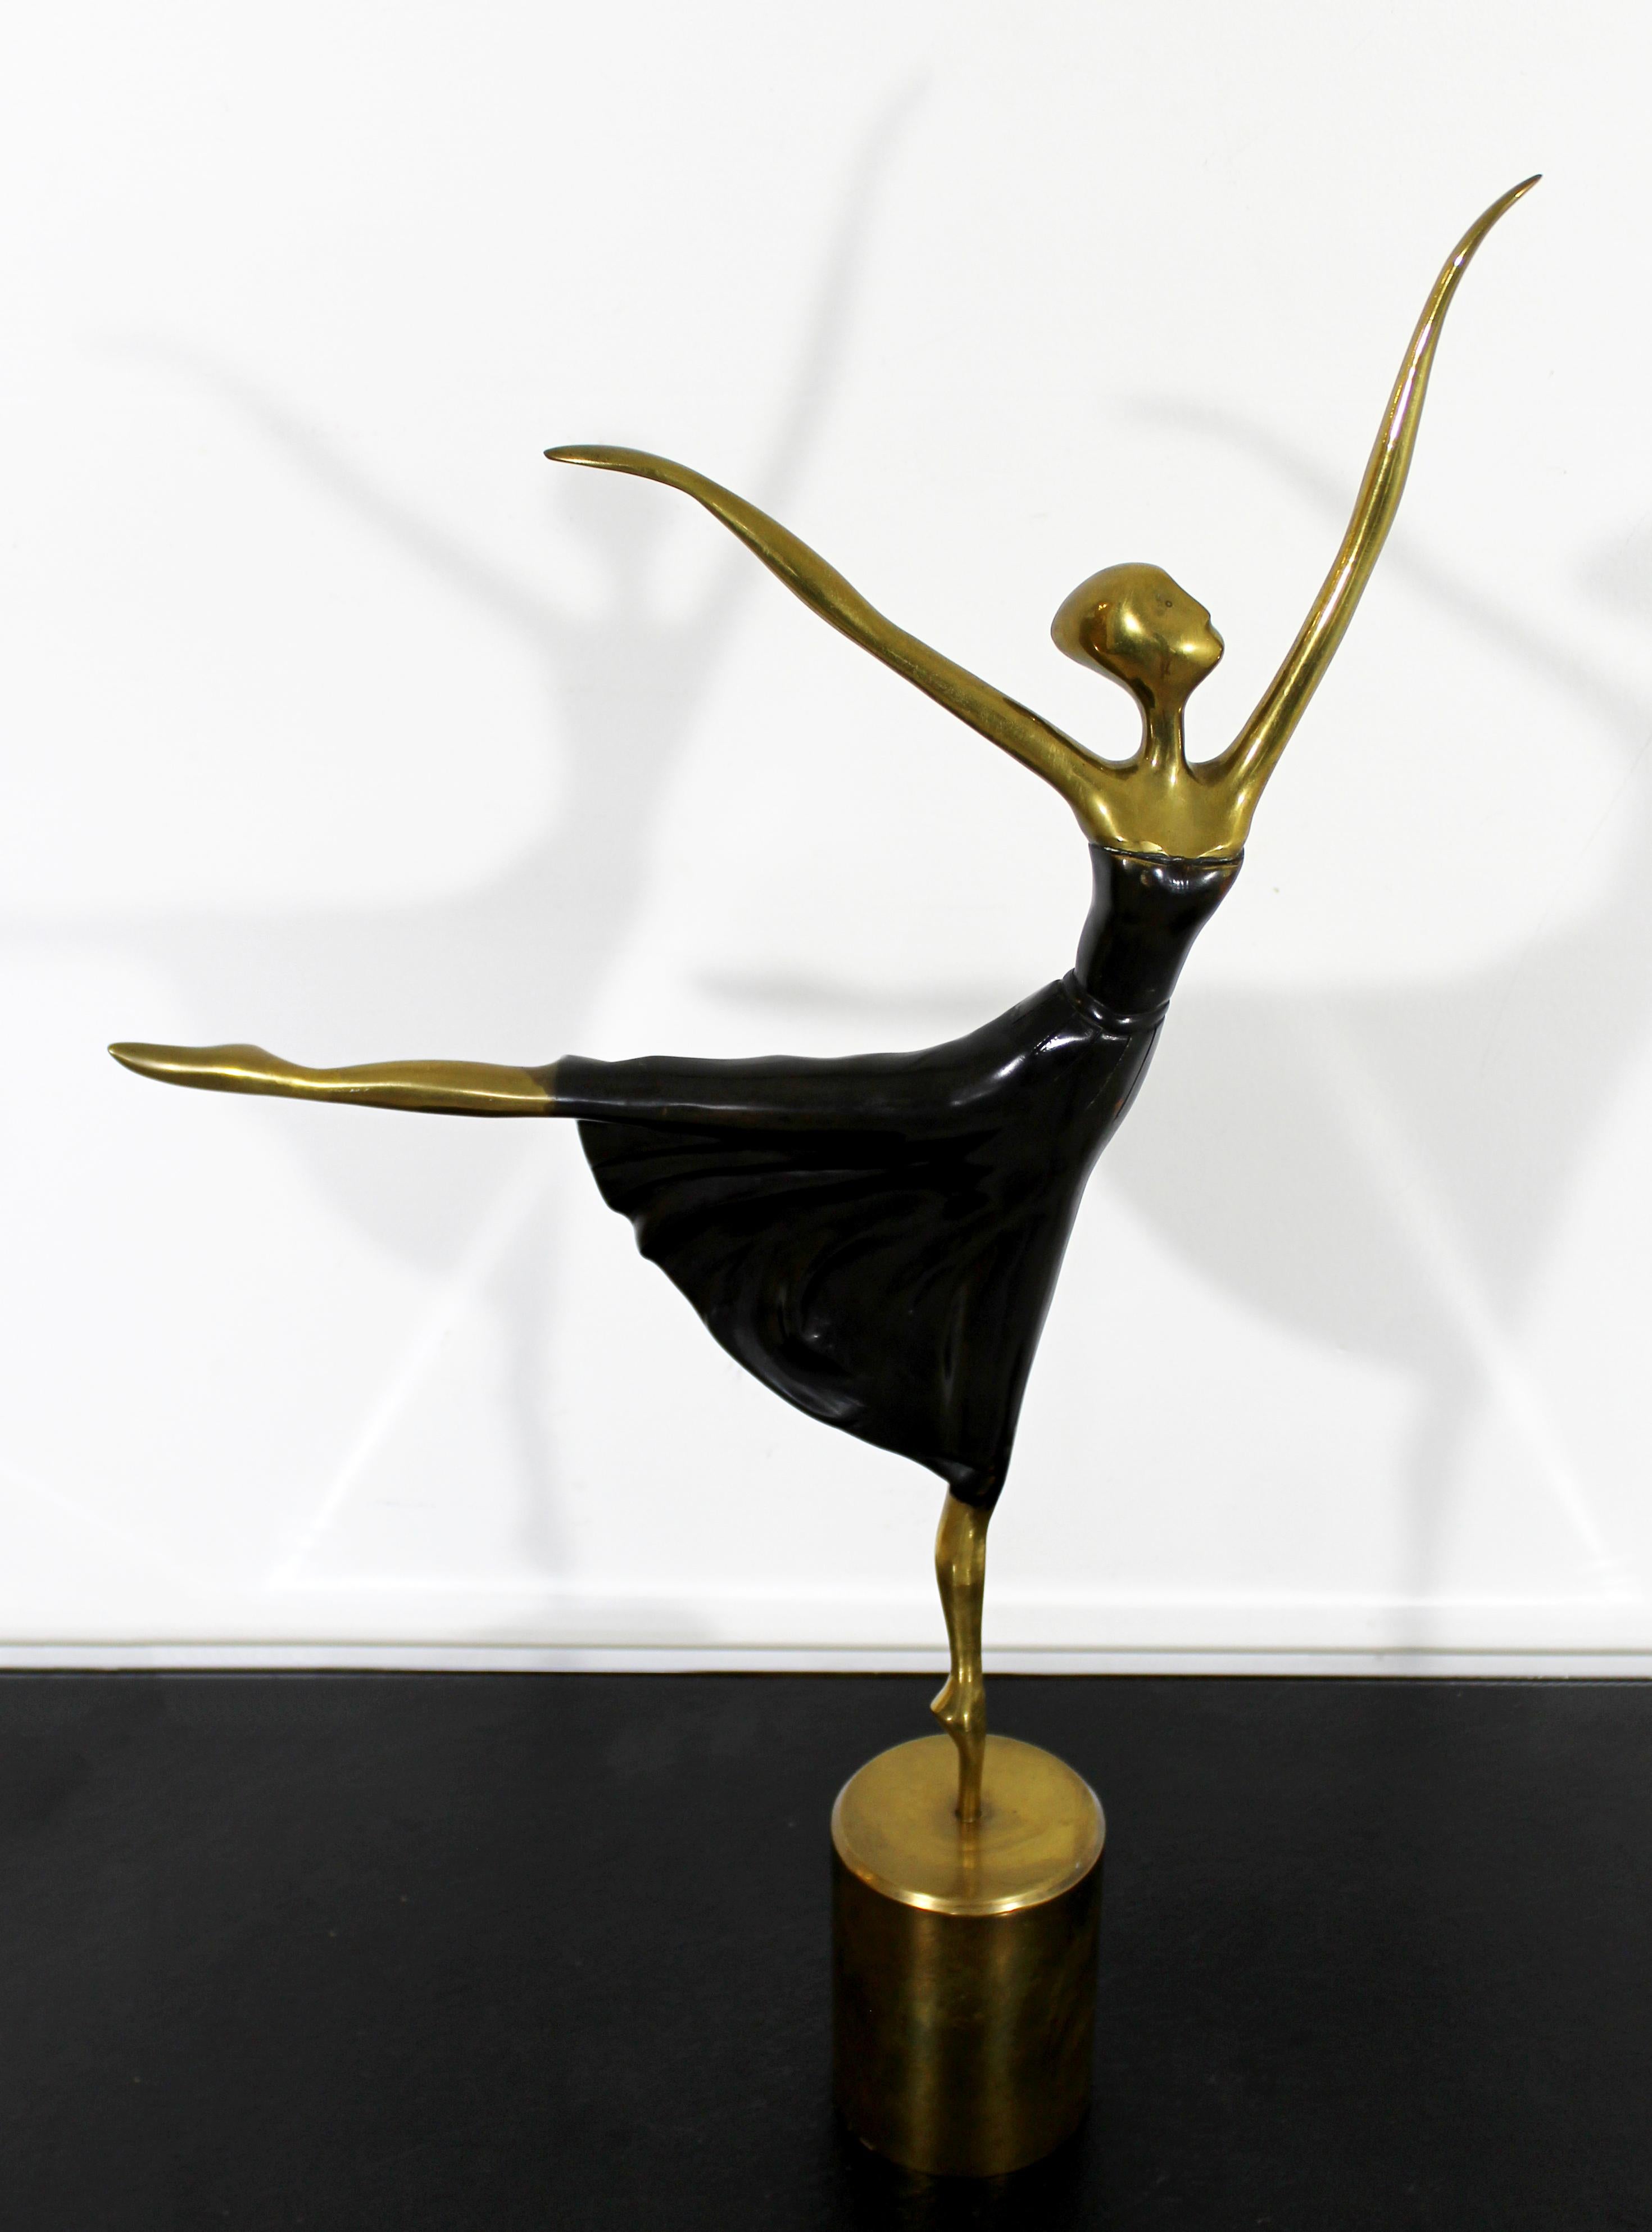 For your consideration is a delightful bronze table sculpture, of a ballerina dancer, circa 1970s. In excellent vintage condition. The dimensions are 17